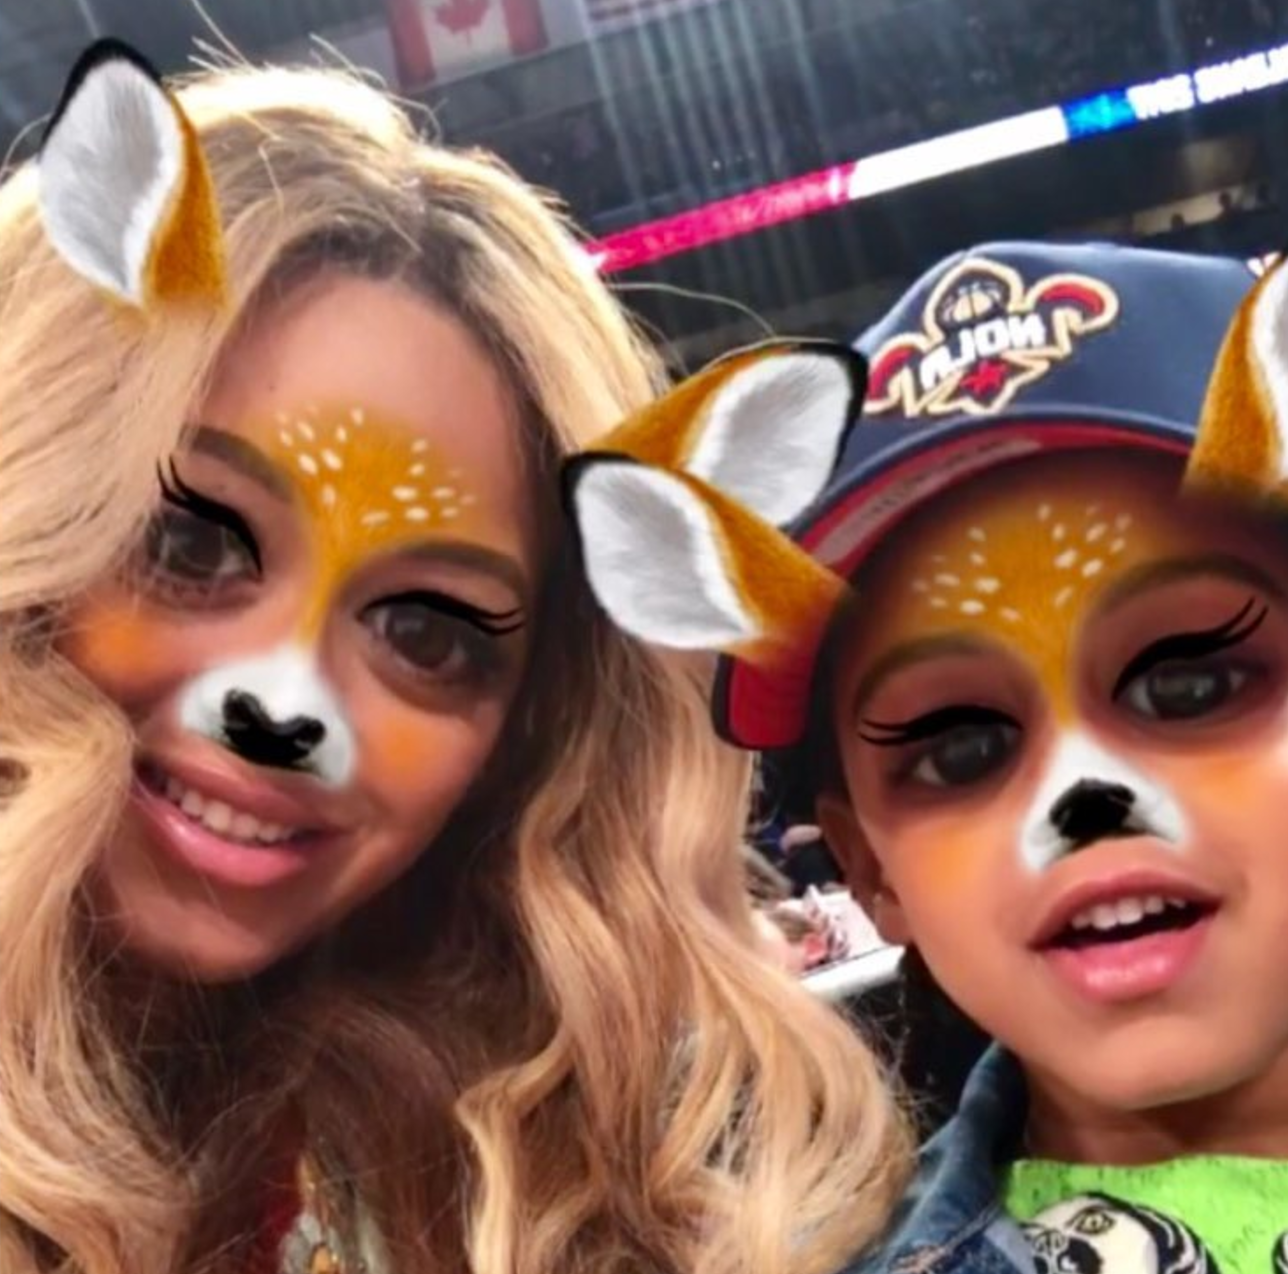 ENTITY shares some of the cutest photos of Beyonce's daughter Blue Ivy.